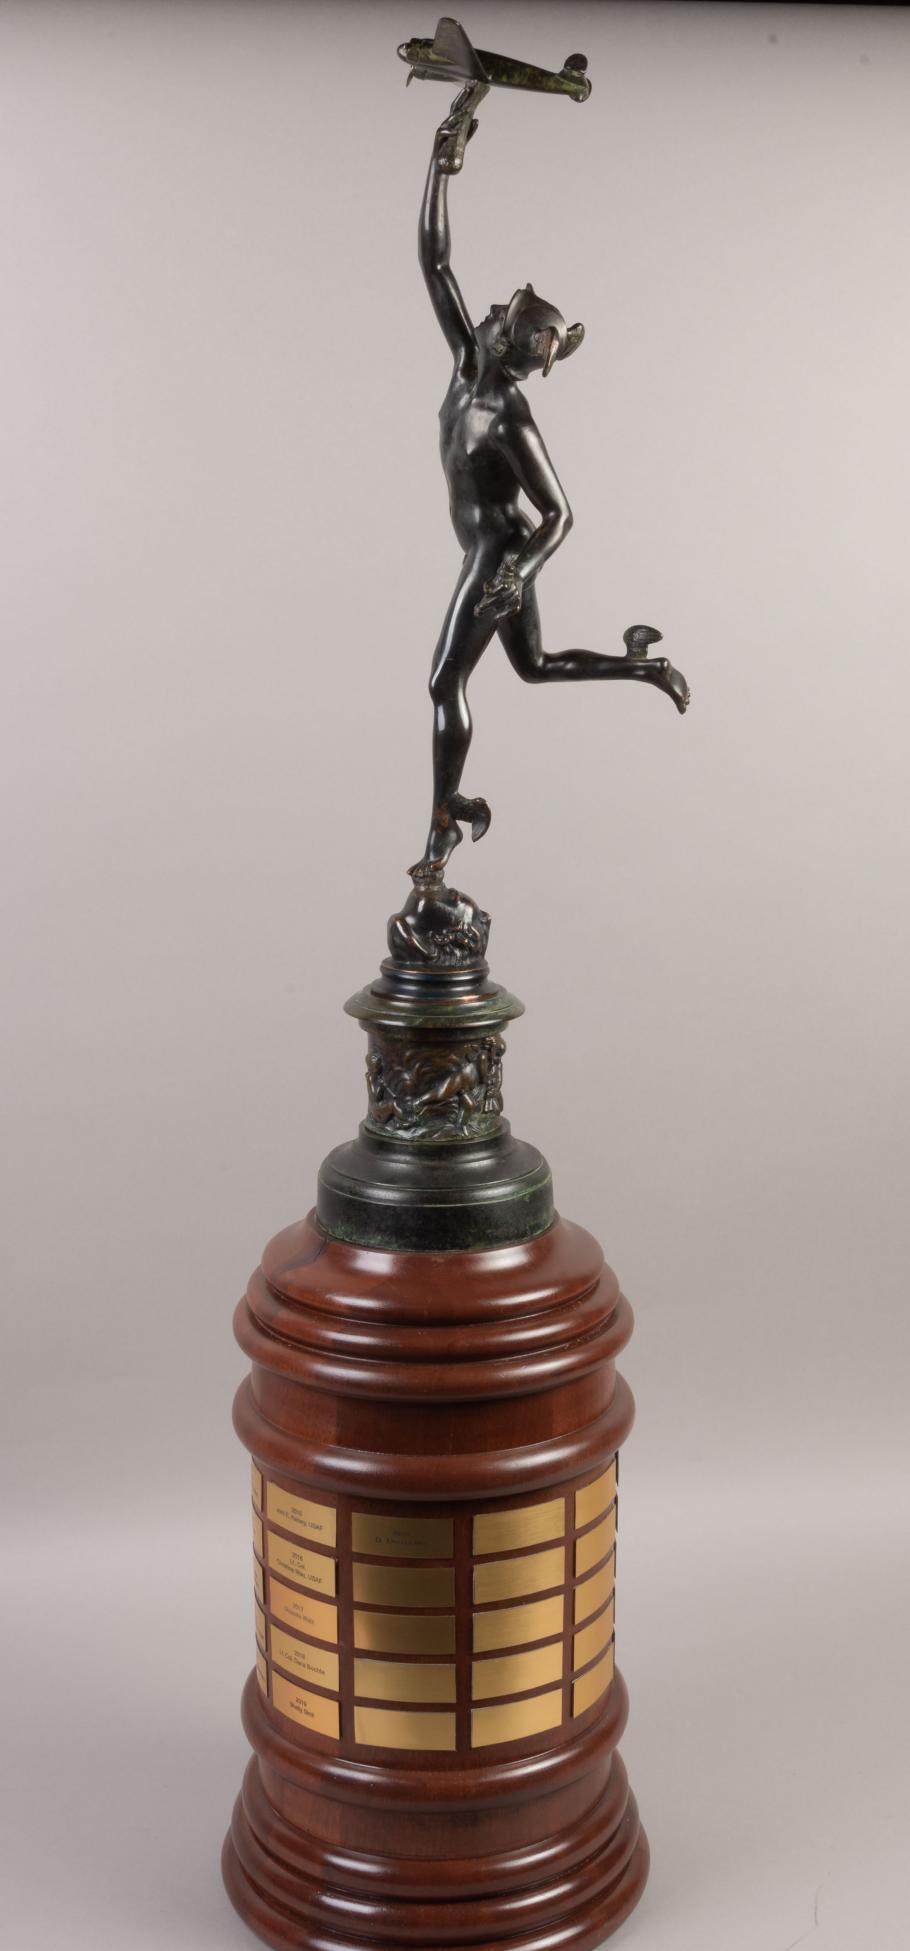 A trophy of a woman holding a plane photographed against a white background.